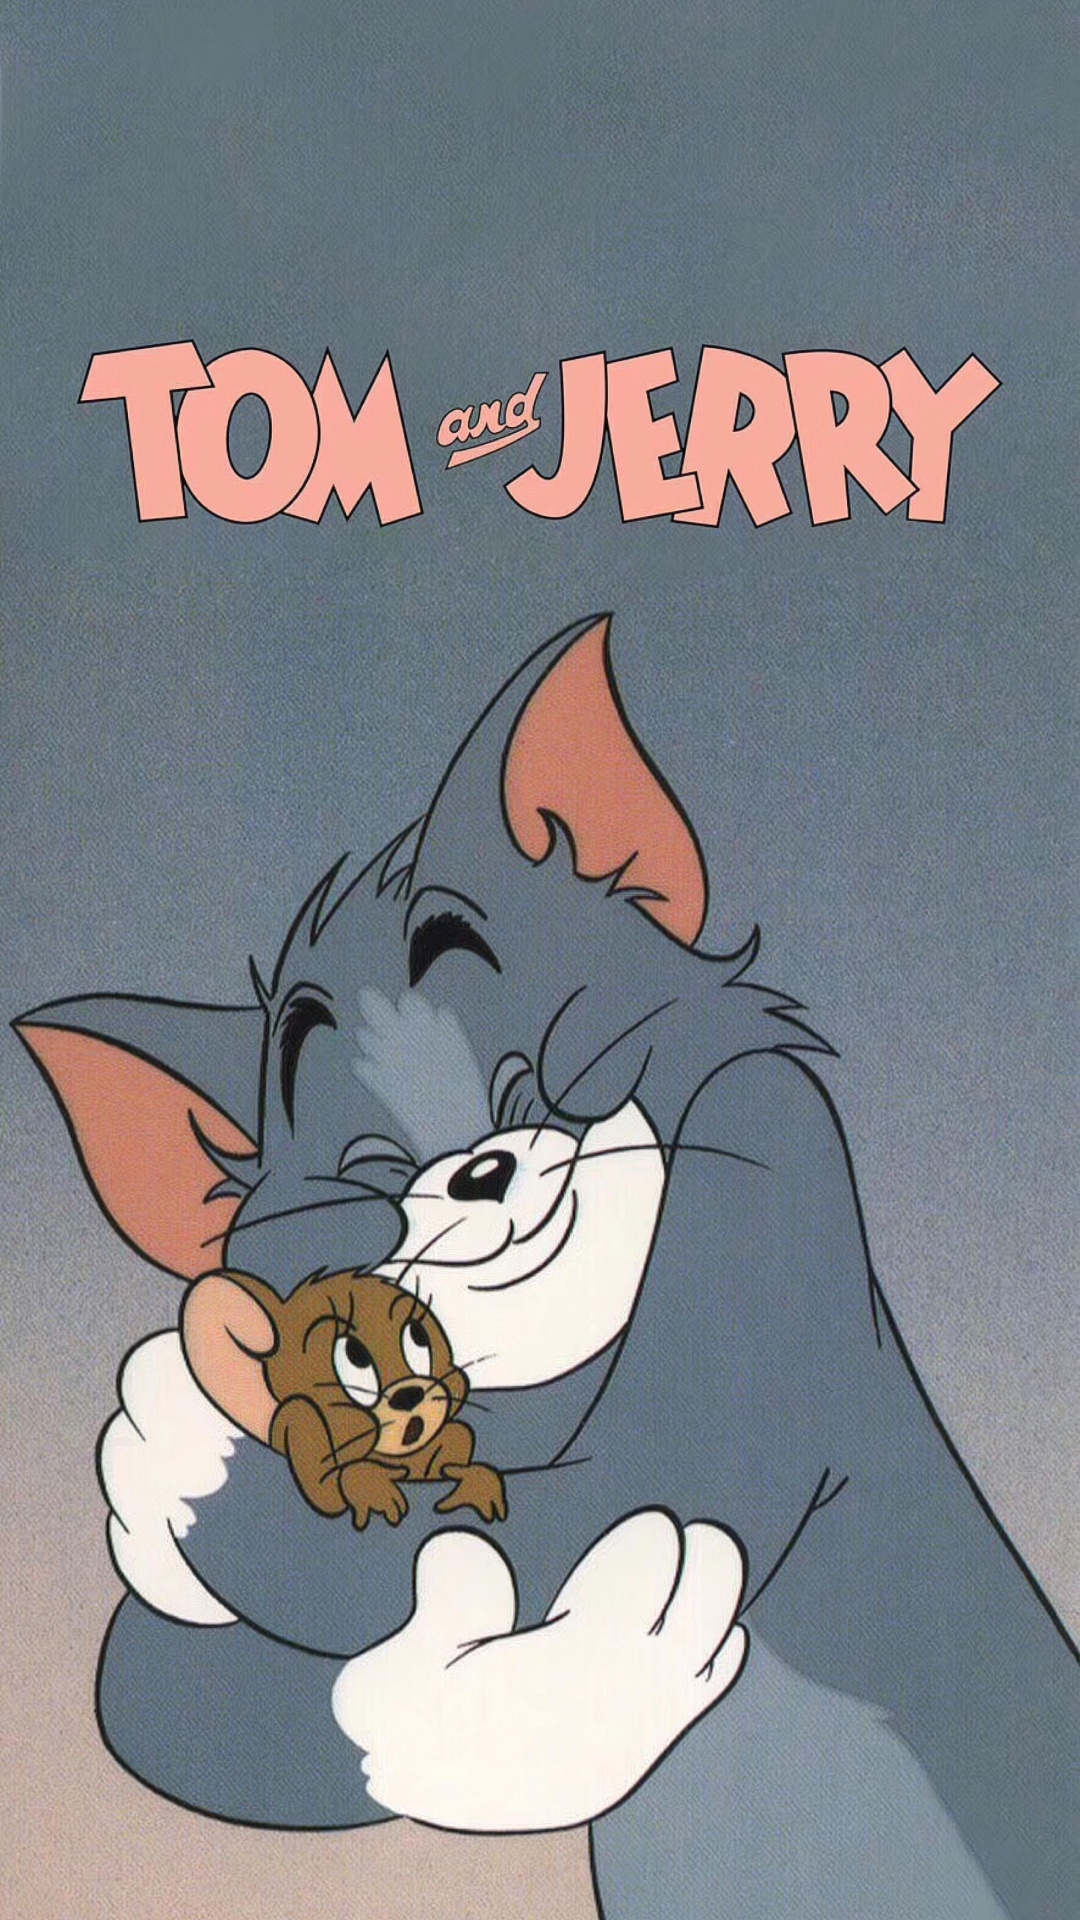 Tom and Jerry Aesthetic, Tom Cat, Jerry Mouse, Aesthetics, Cartoon. Wallpaper in 1080x1920 Resolution